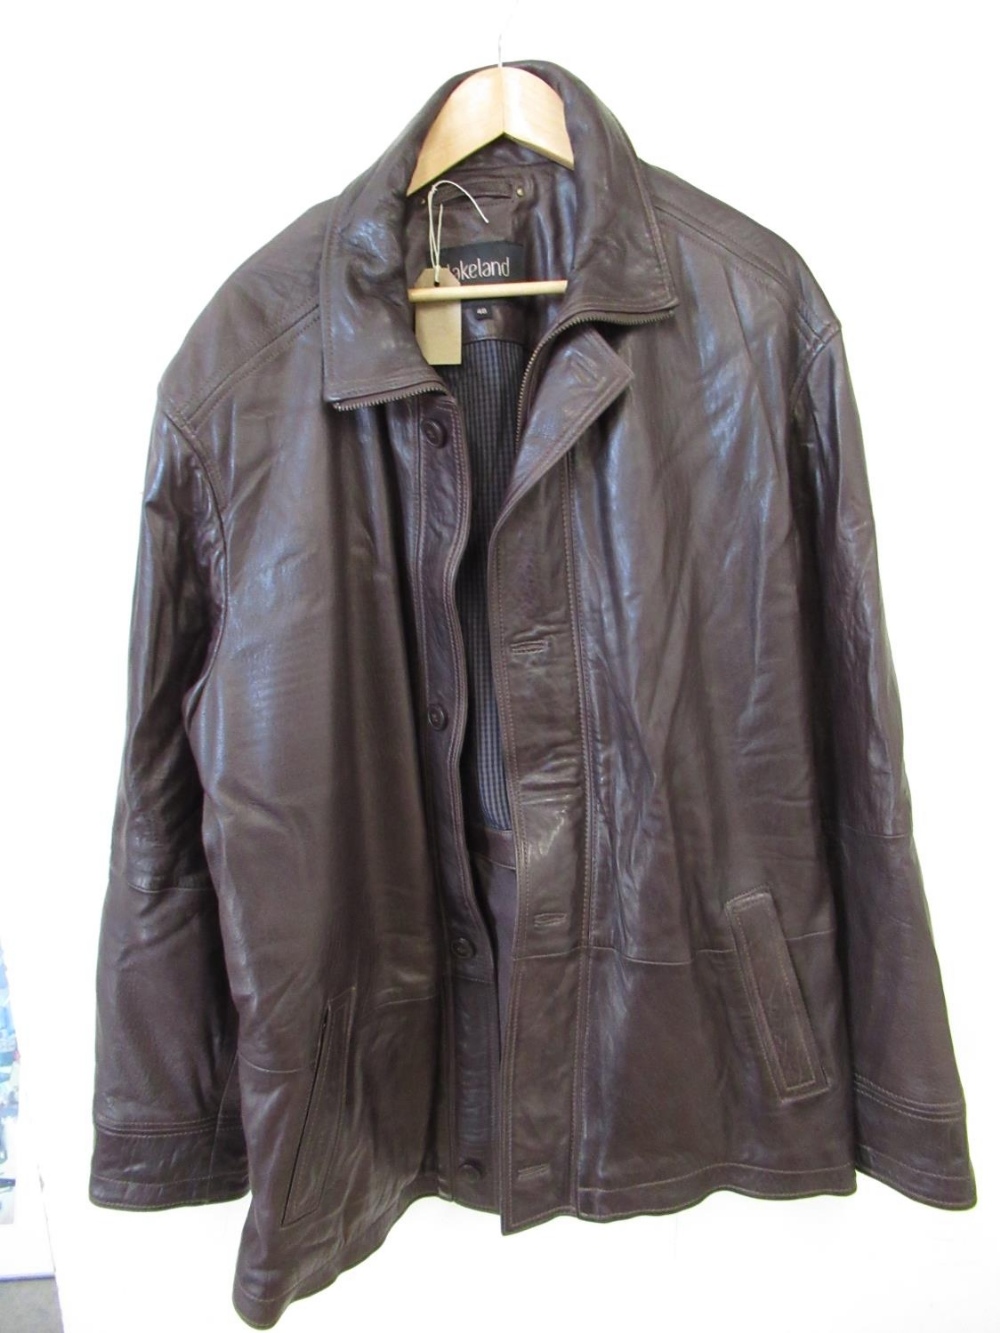 Lakeland size 48 brown leather jacket, button and zip front slip pockets